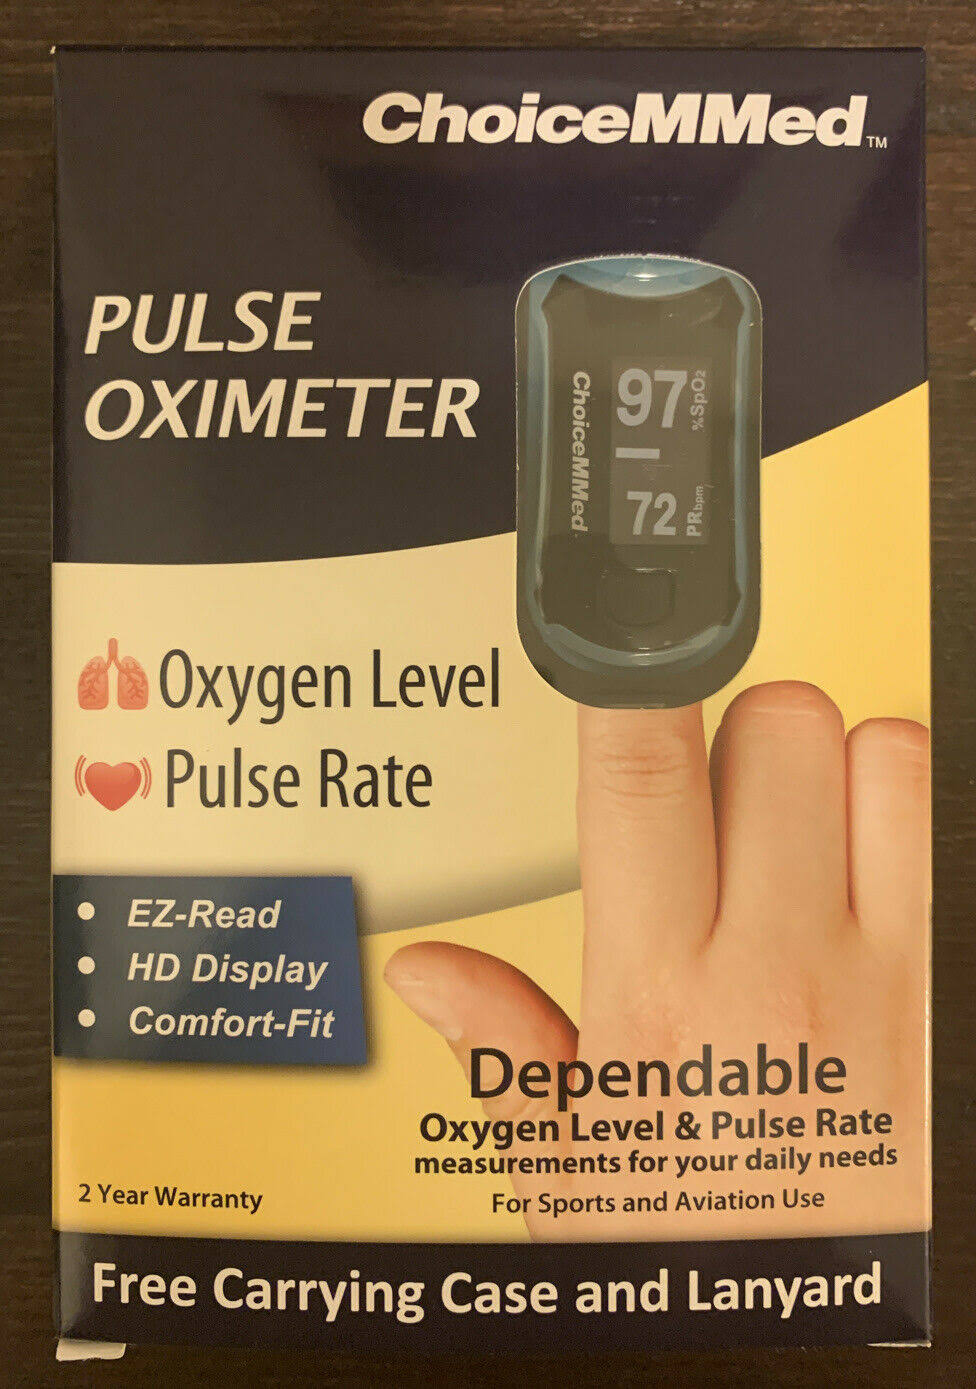 OxyWatch Pulse Oximeter - Choice Mmed